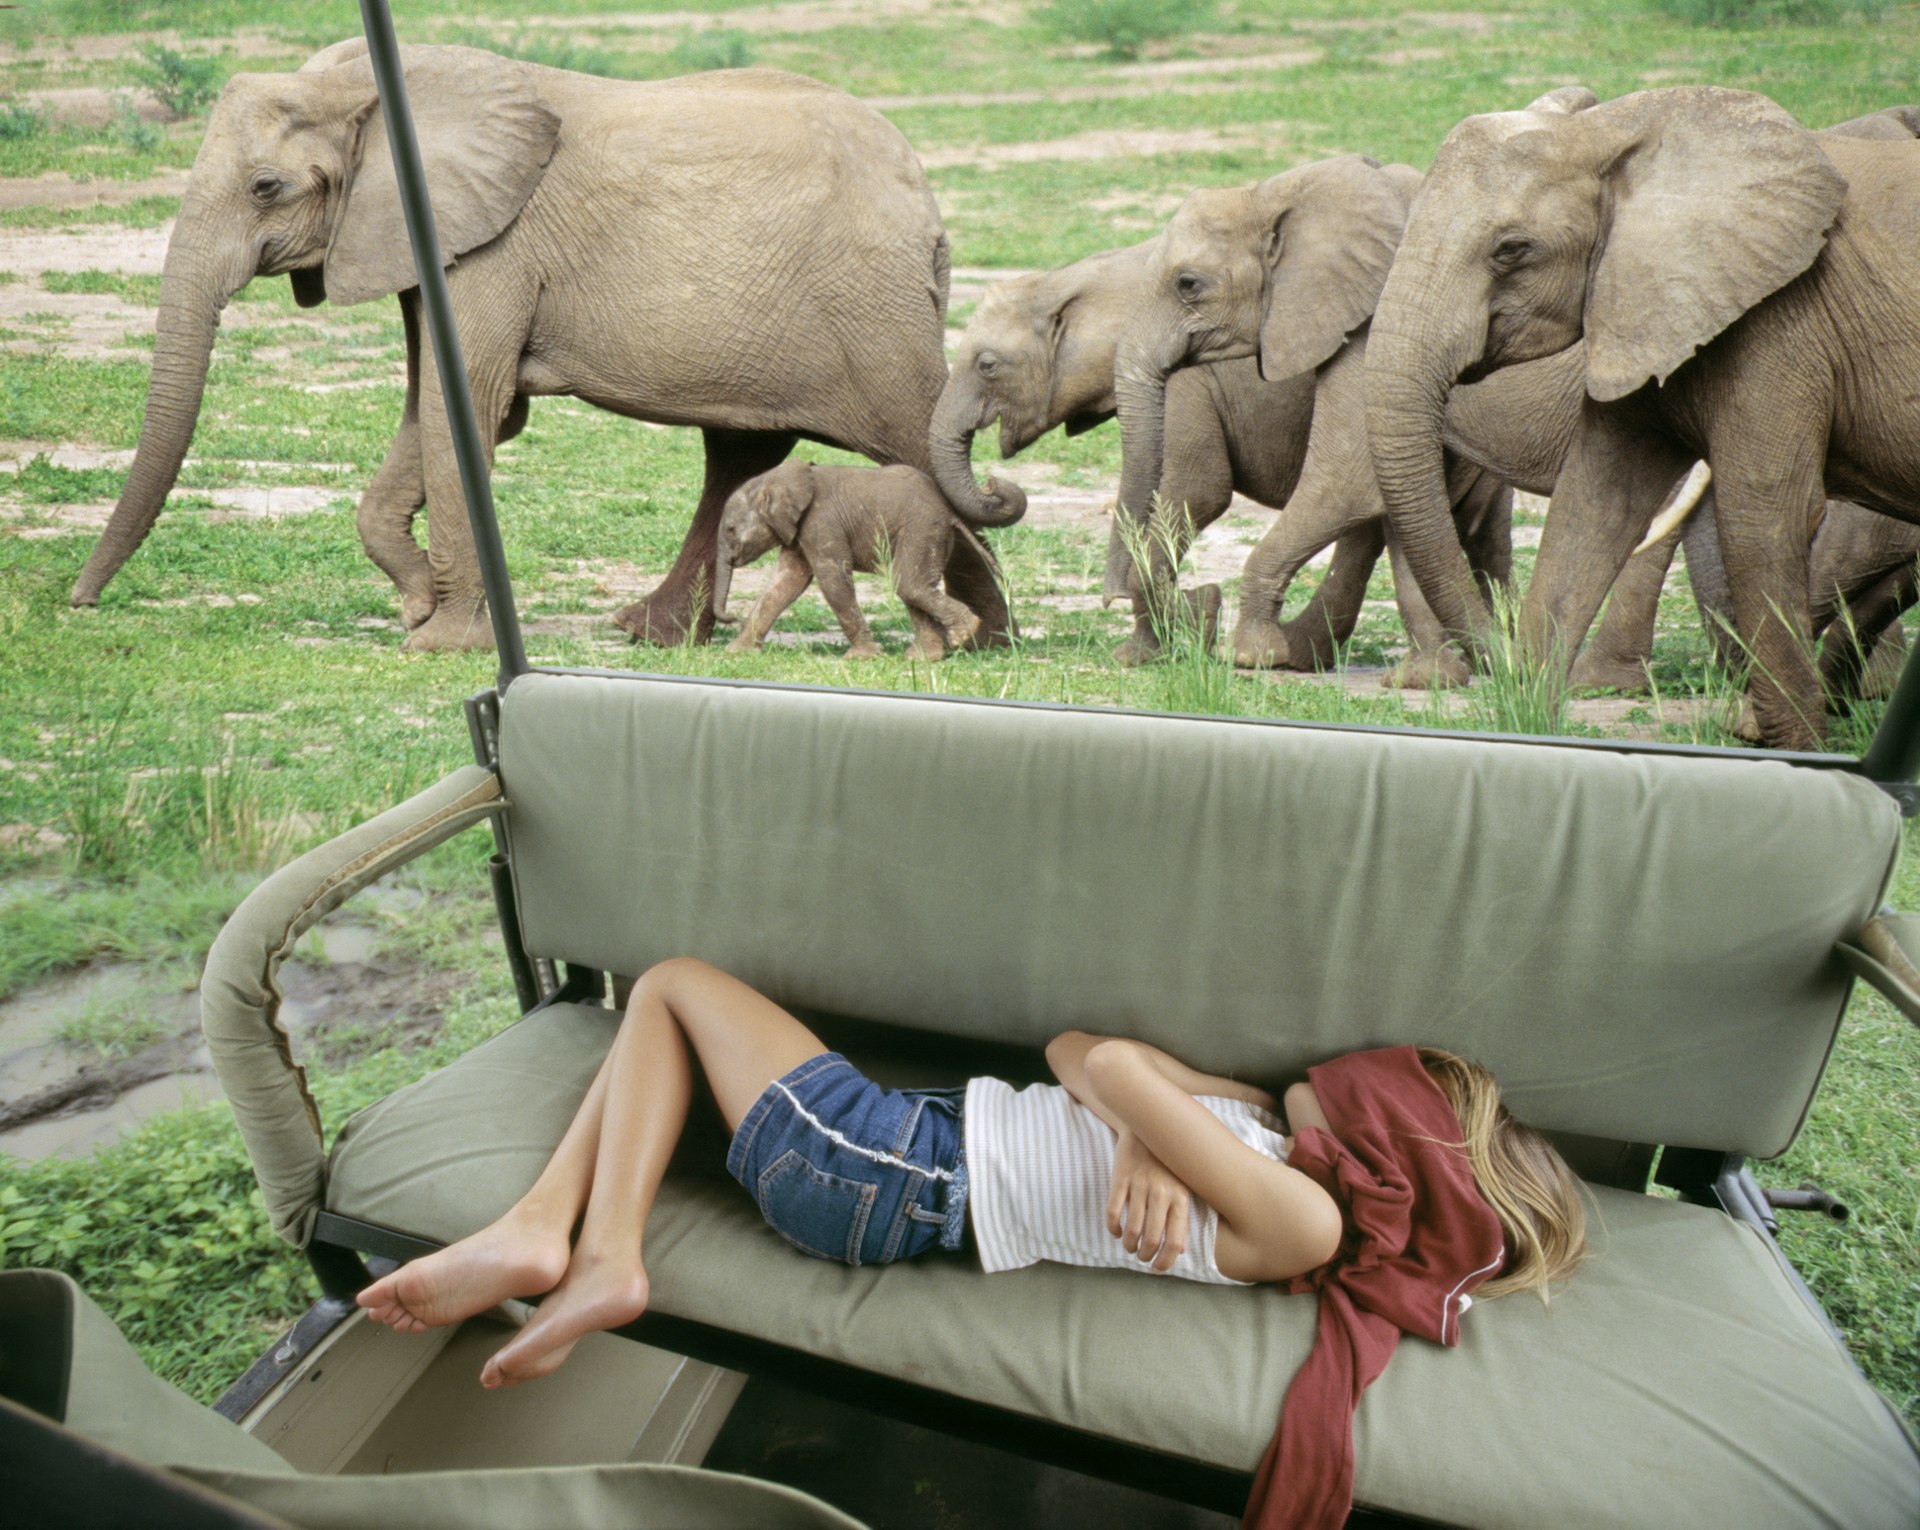 Child sleeps in a safari vehicle with elephants in the background in Tanzania